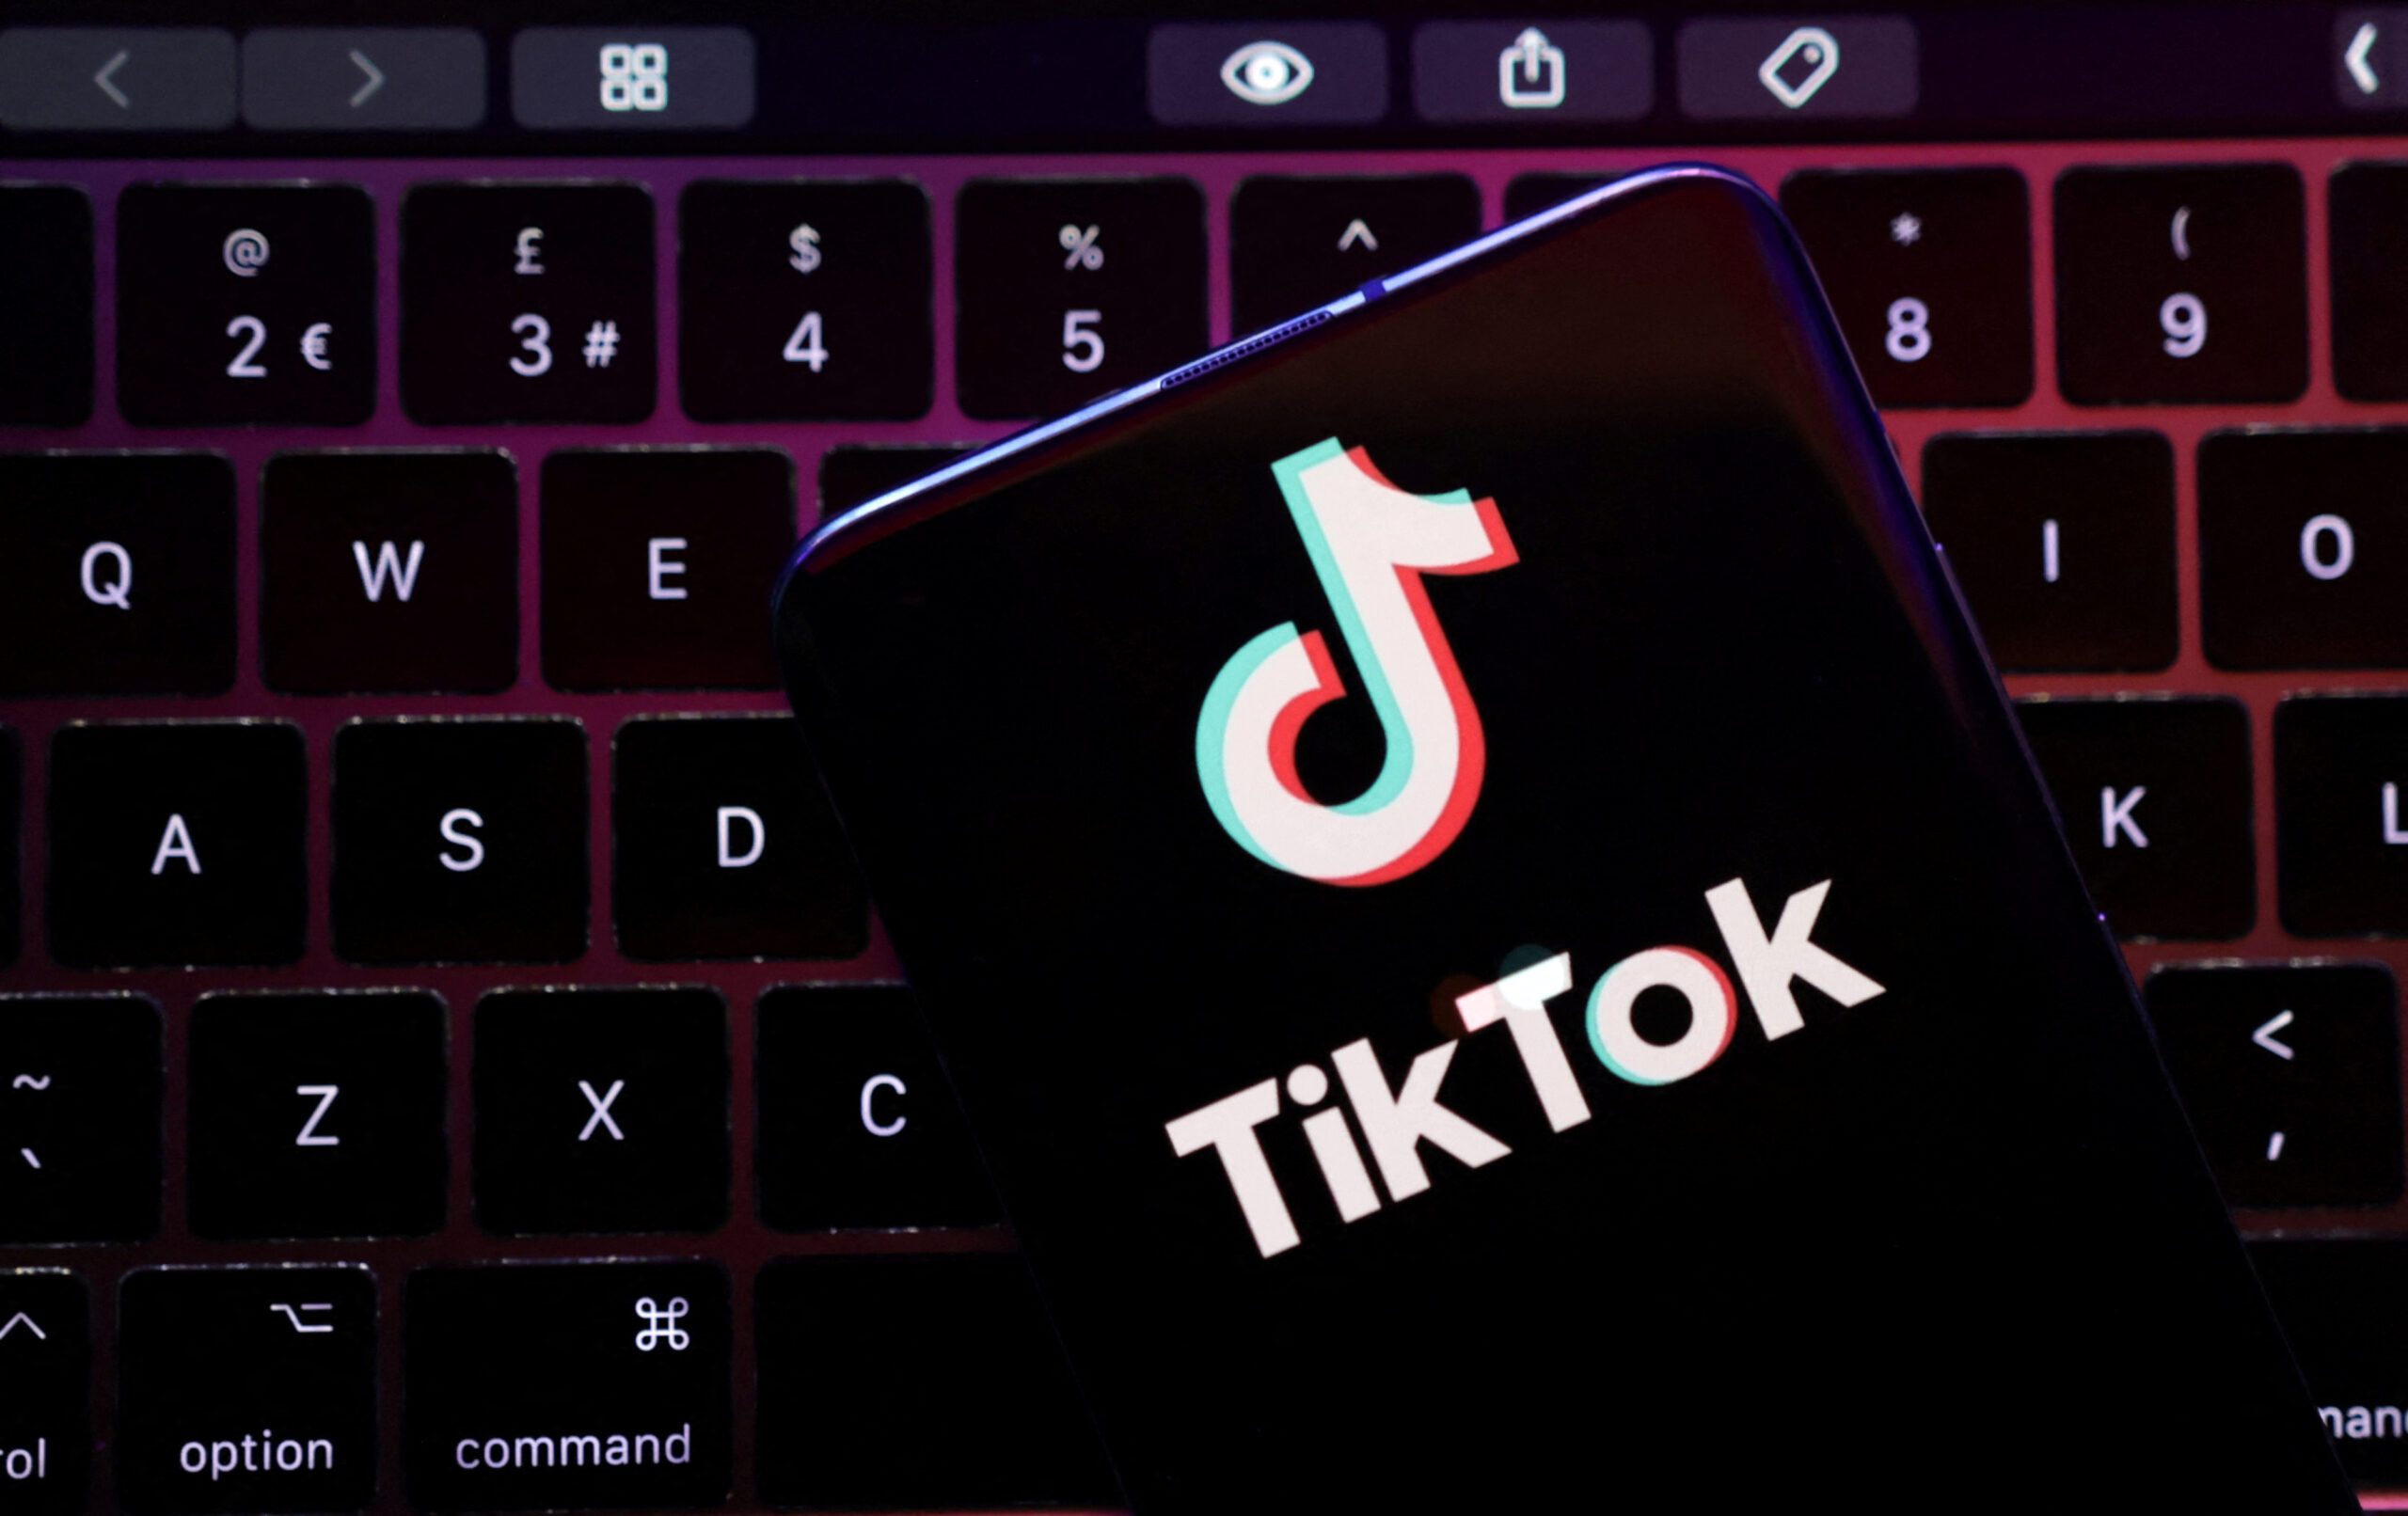 TikTok, YouTube, Meta likely to seek e-commerce licences in Indonesia